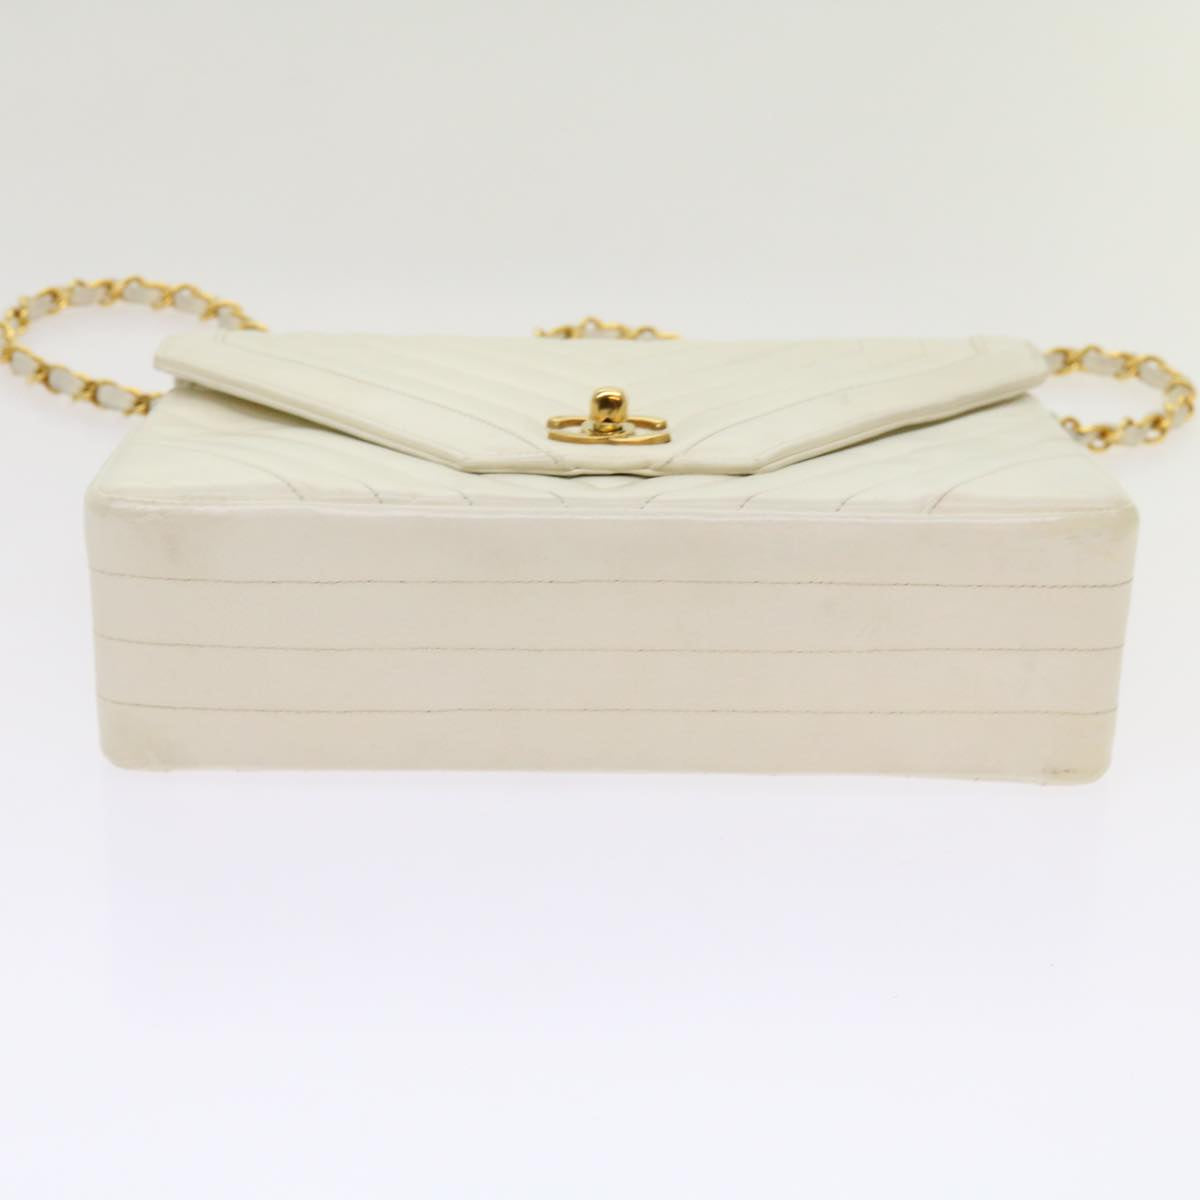 CHANEL Turn Lock Chain V Stitch Shoulder Bag Leather White CC Auth bs13035